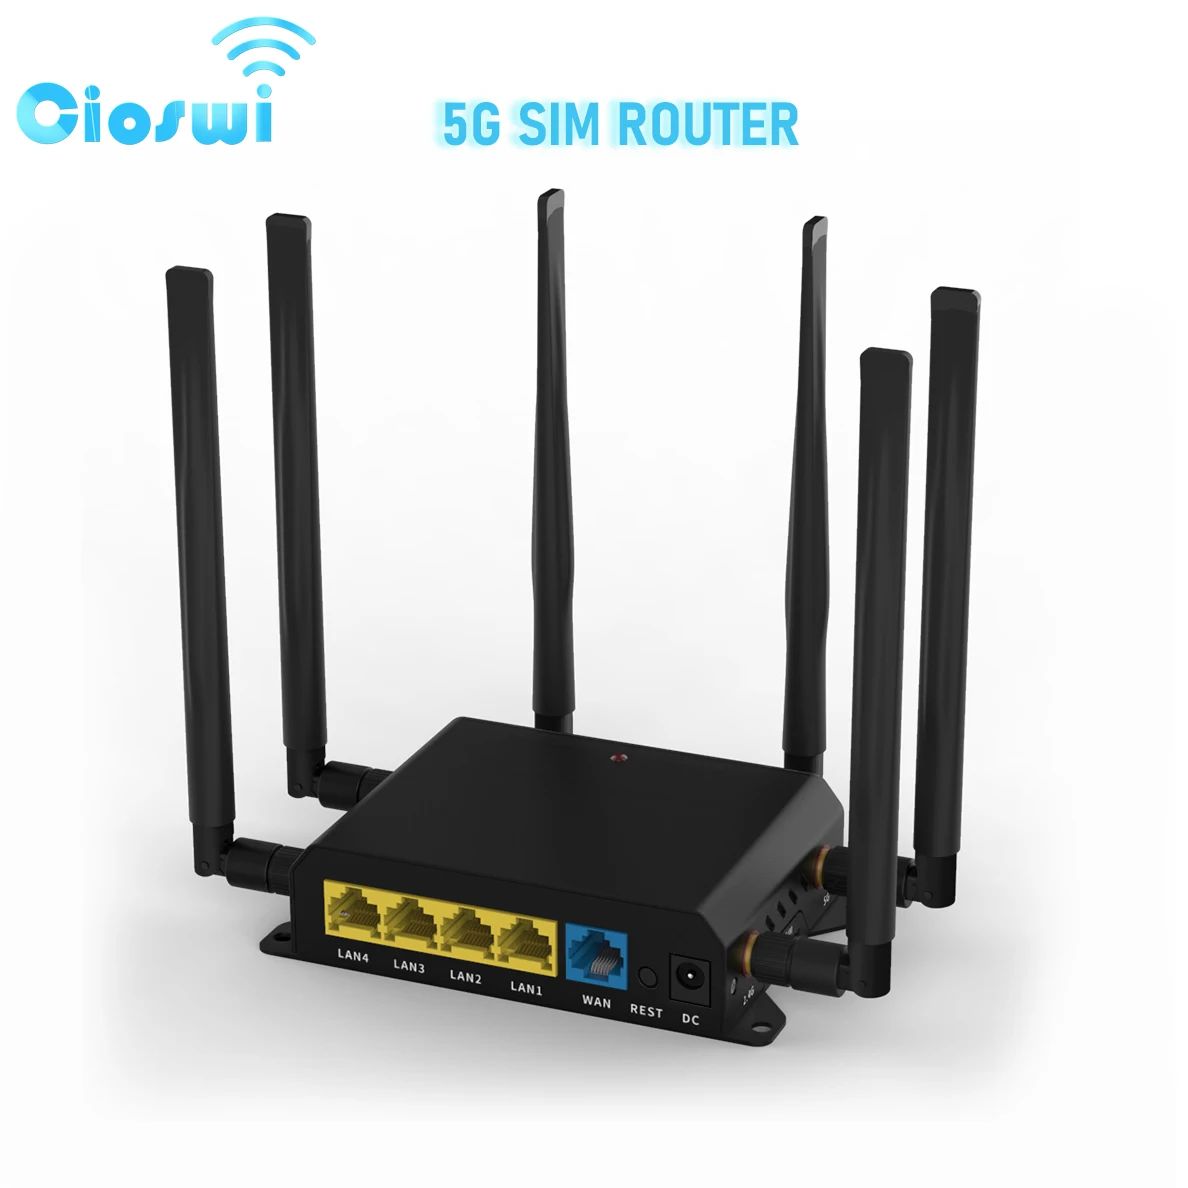 Cioswi 4G 5G Lte Router Home WiFi SIM Card M.2 2.4GHz 300Mbps Openwrt 4*1000Mbps LAN WAN 6 External Antenna Internet Roteador